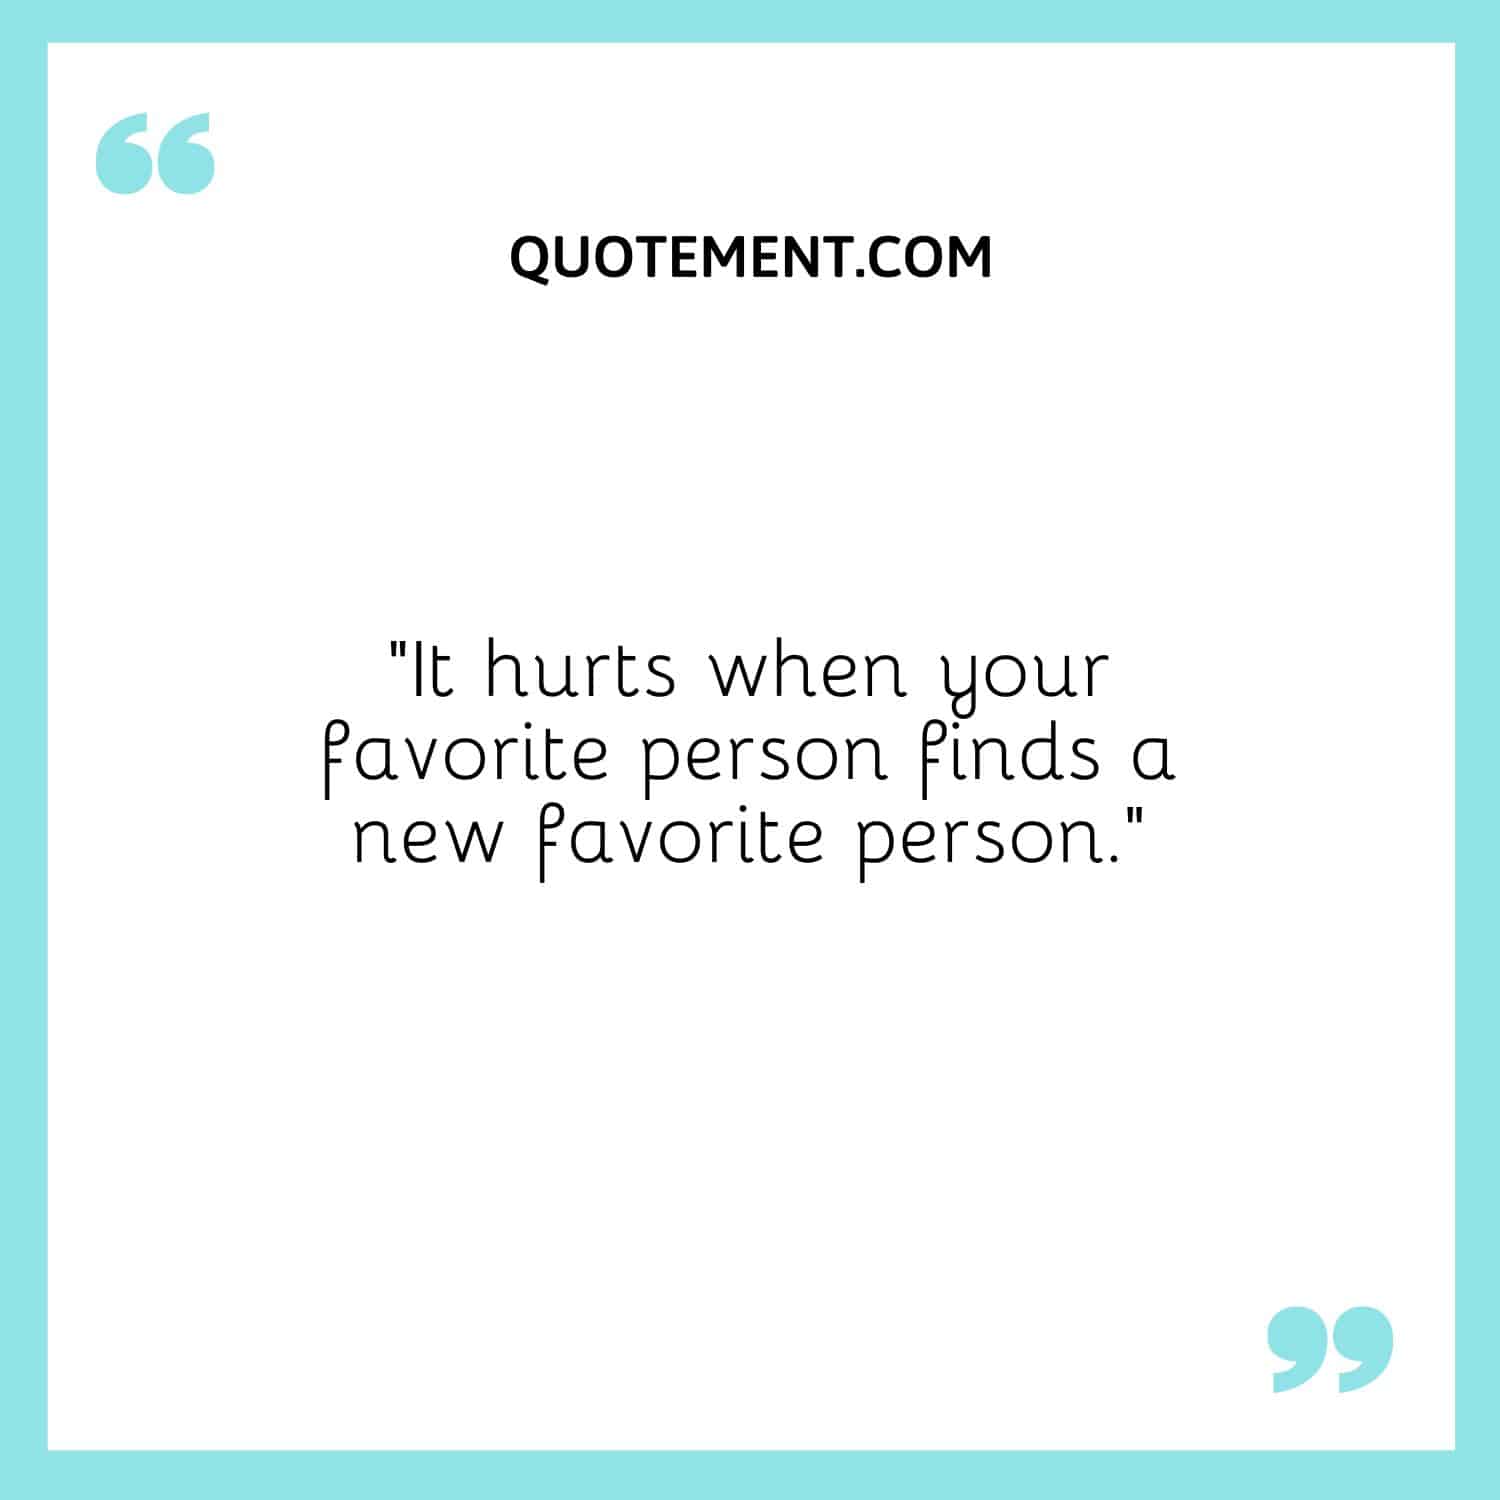 It hurts when your favorite person finds a new favorite person